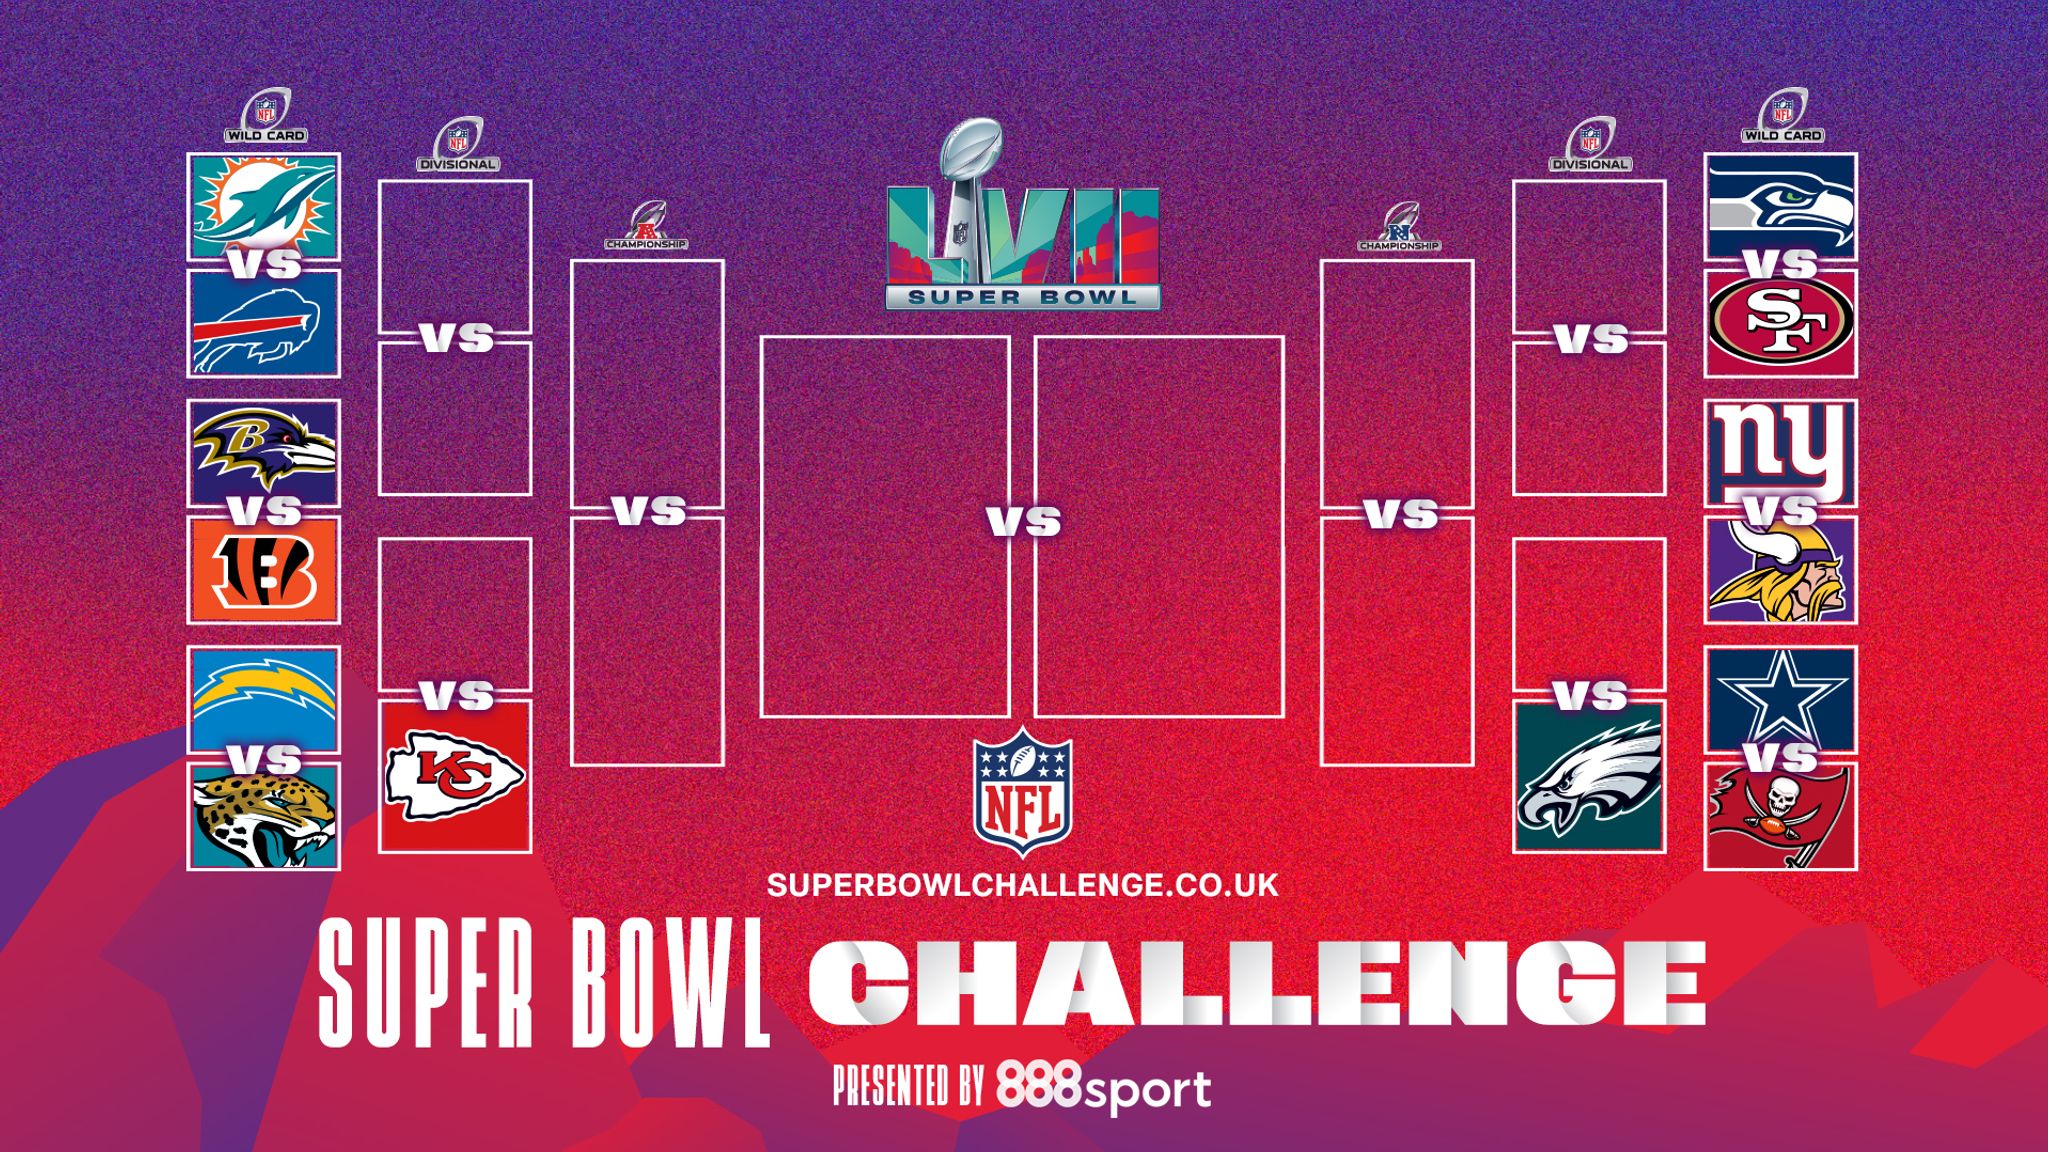 Super Bowl Challenge: Sign up to play and pick who you think will